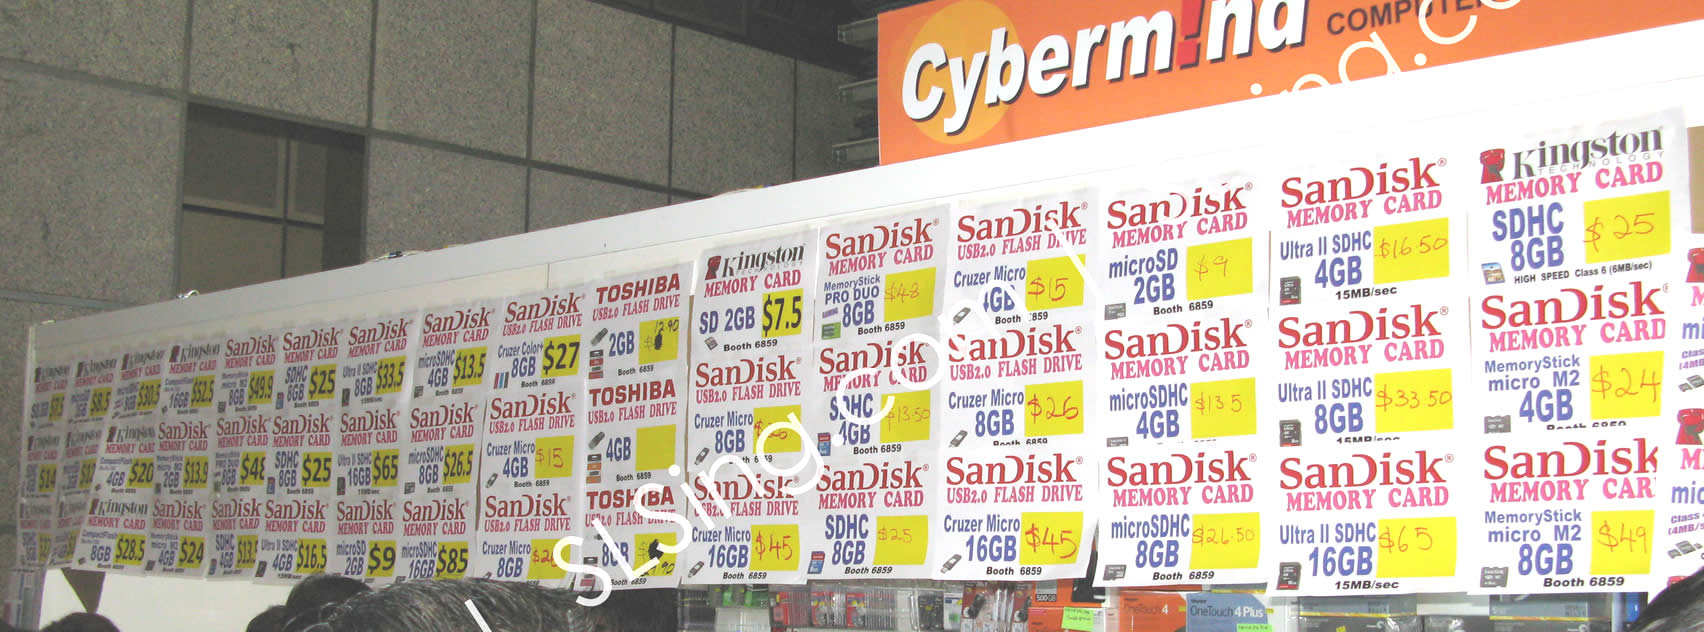 IT Show 2009 price list image brochure of Sandisk Kingston Toshiba (Cybermind) (vr-zone Booest)